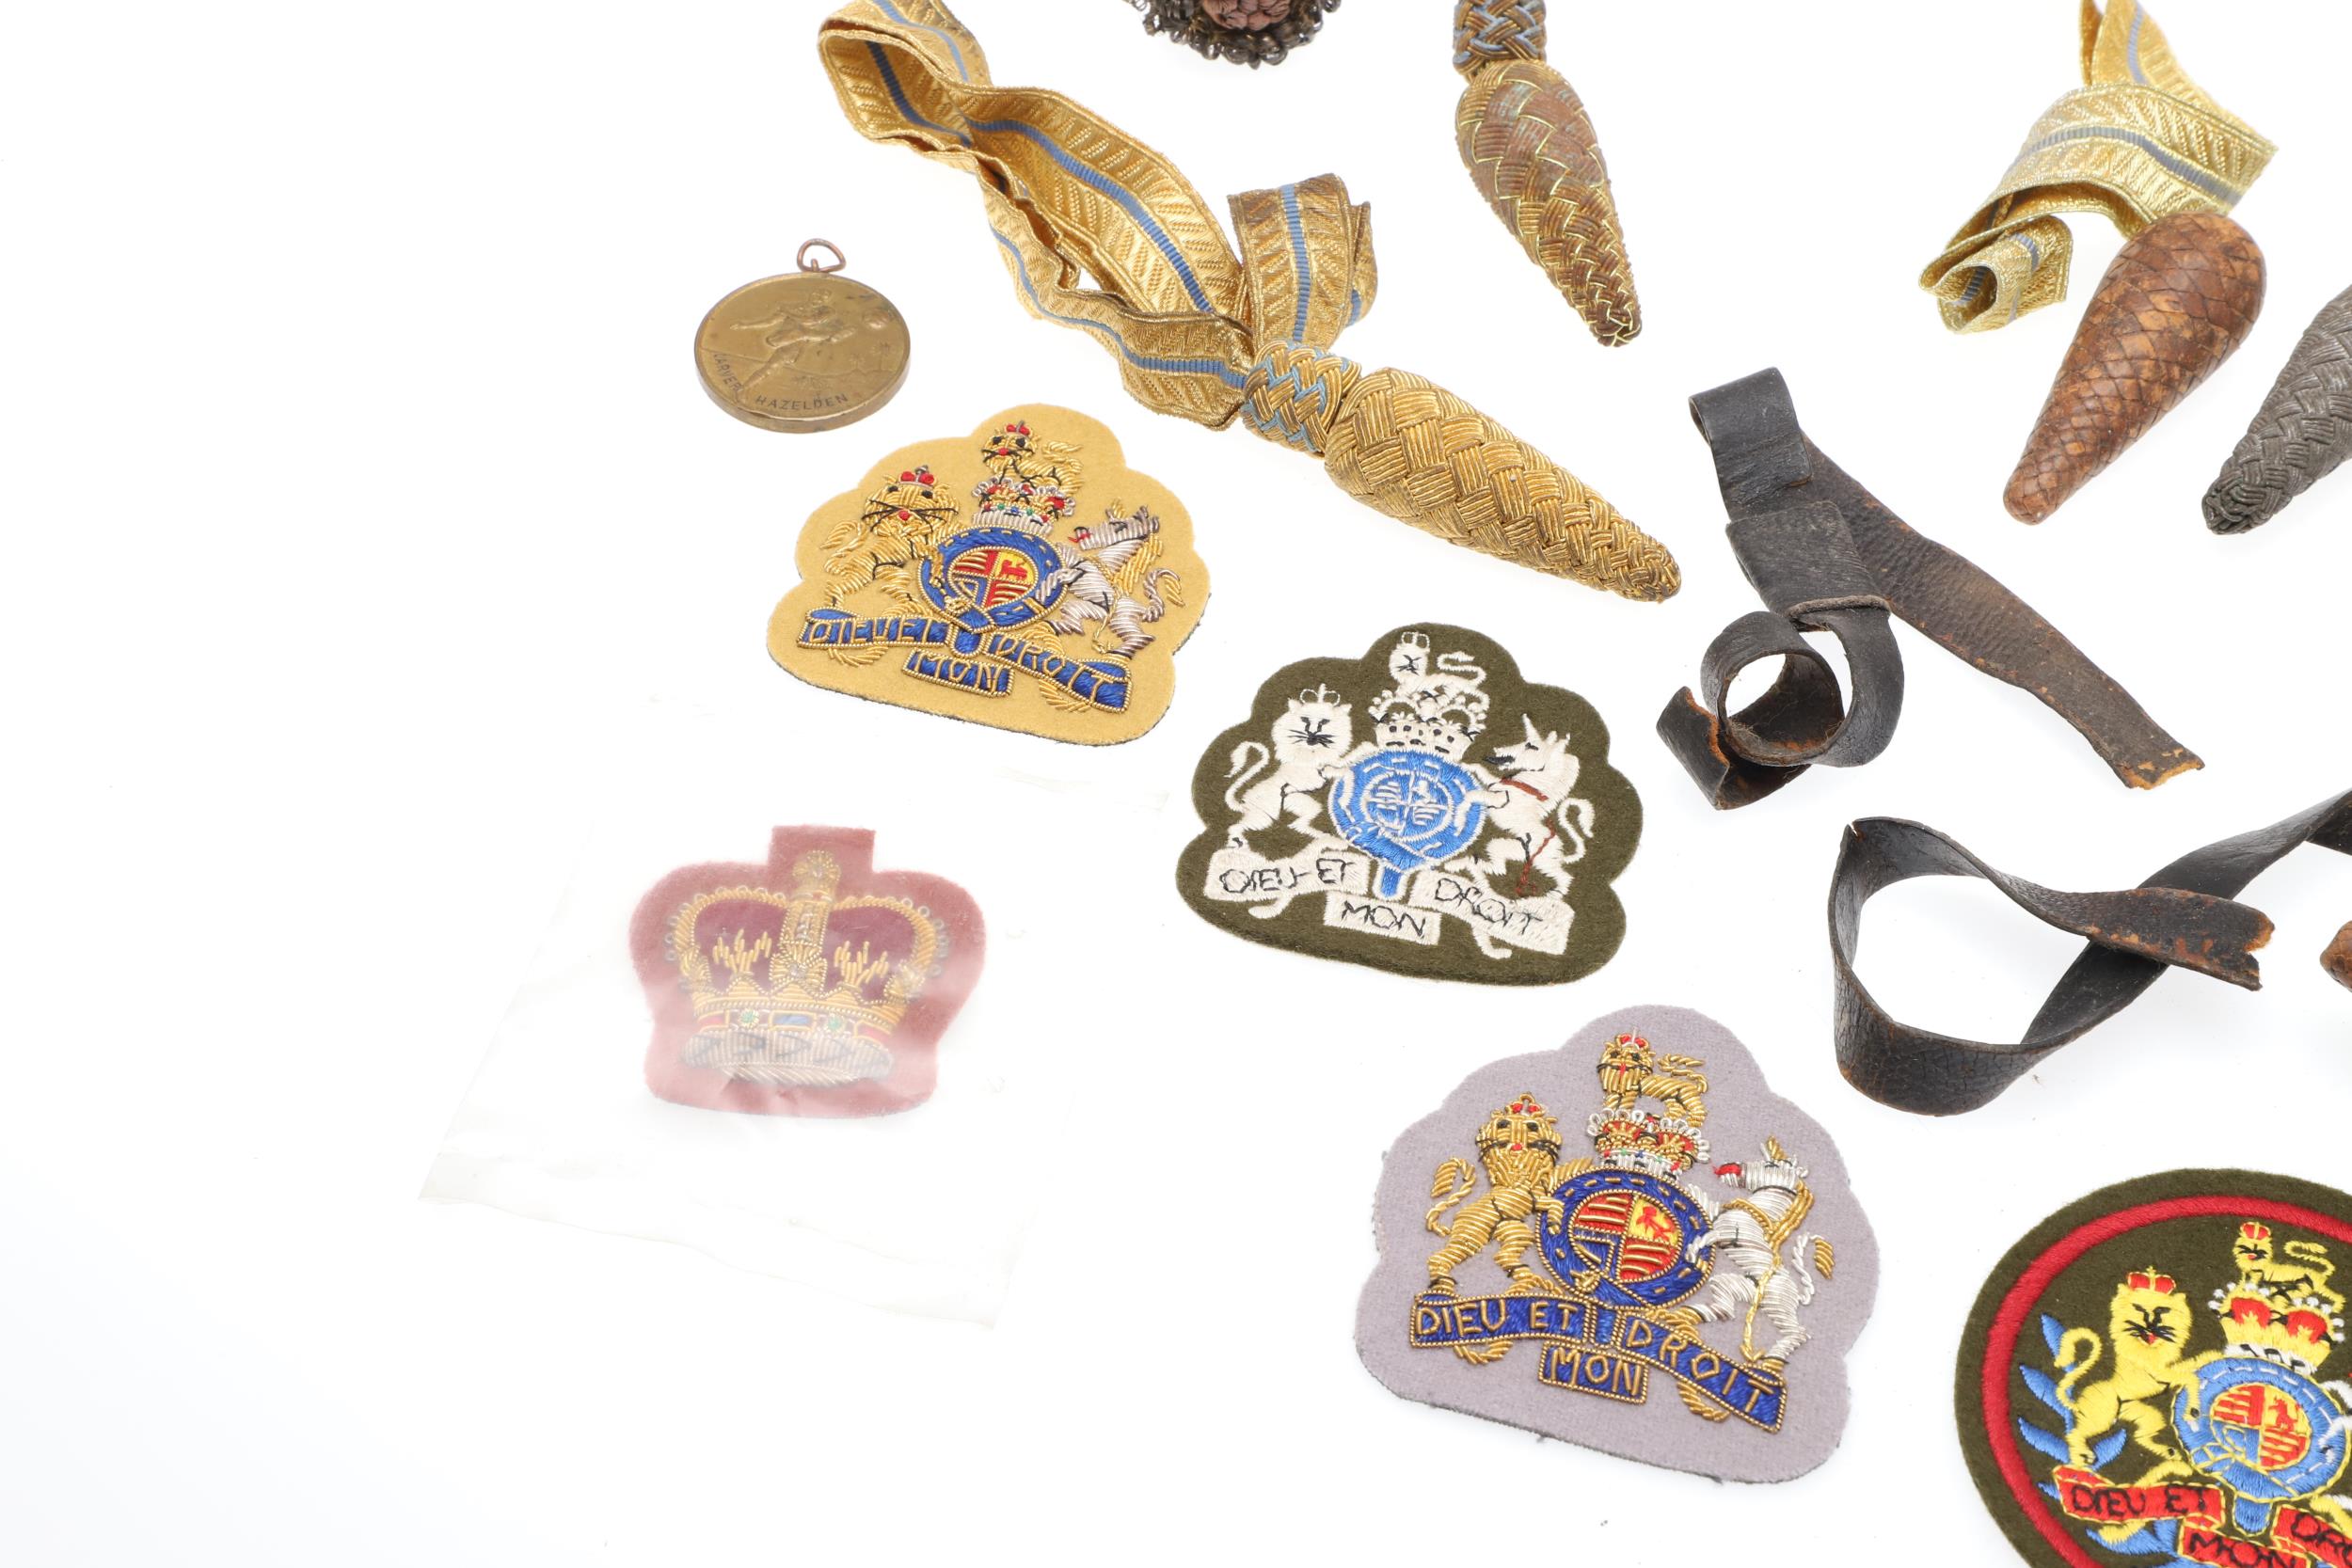 A COLLECTION OF SWORD KNOTS AND MILITARY BADGES. - Image 9 of 11